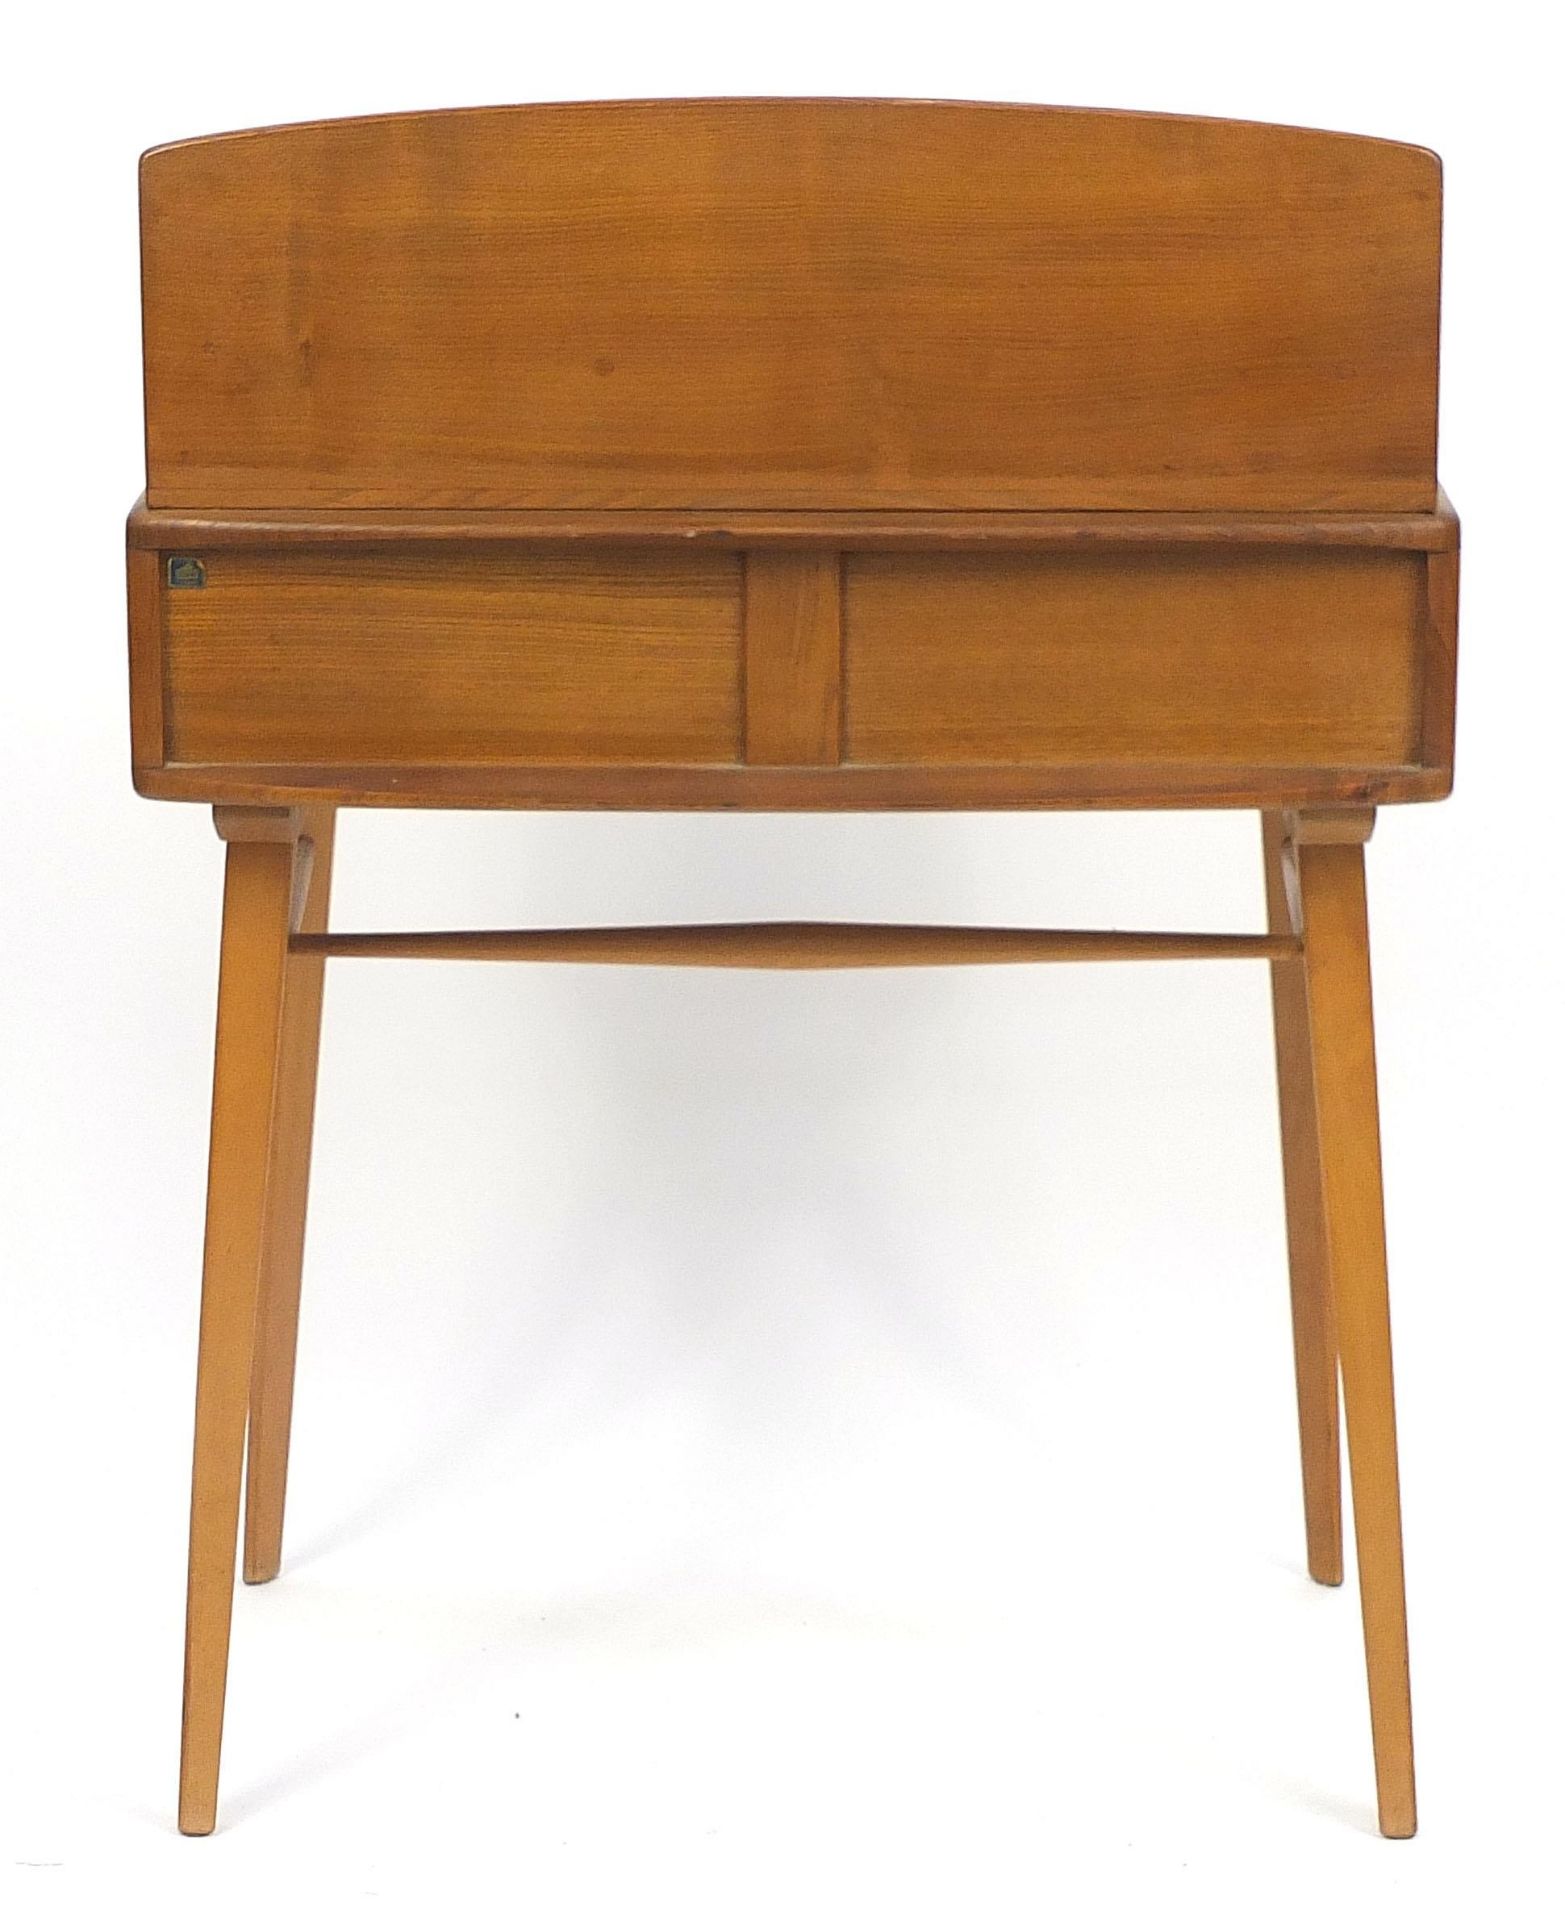 Ercol light elm dressing table with three drawers, 93cm H x 68.5cm W x 48cm D - Image 5 of 6